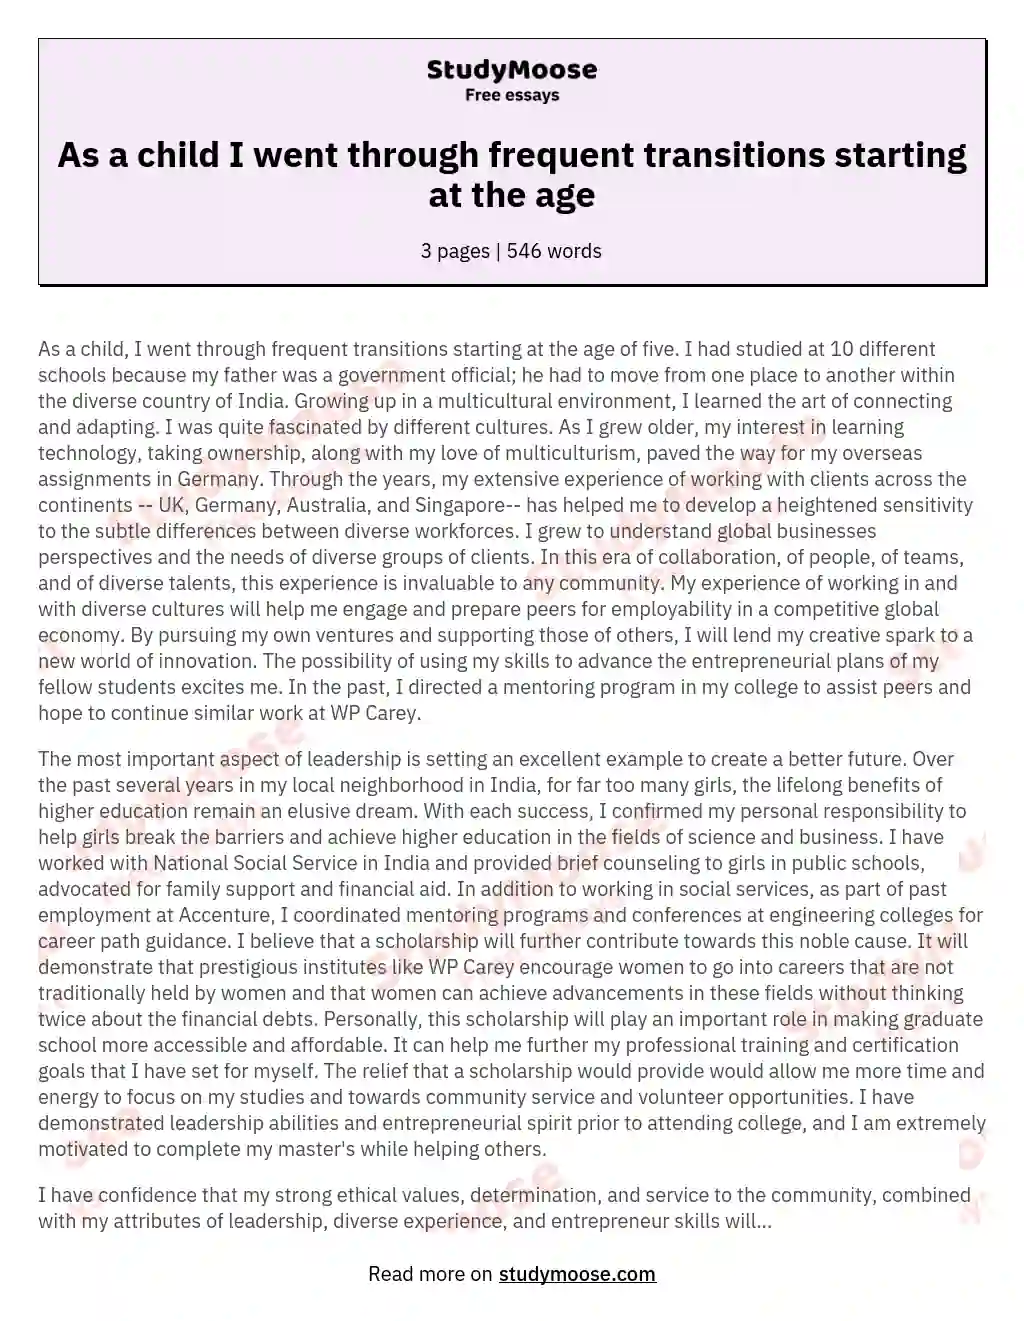 As a child I went through frequent transitions starting at the age essay